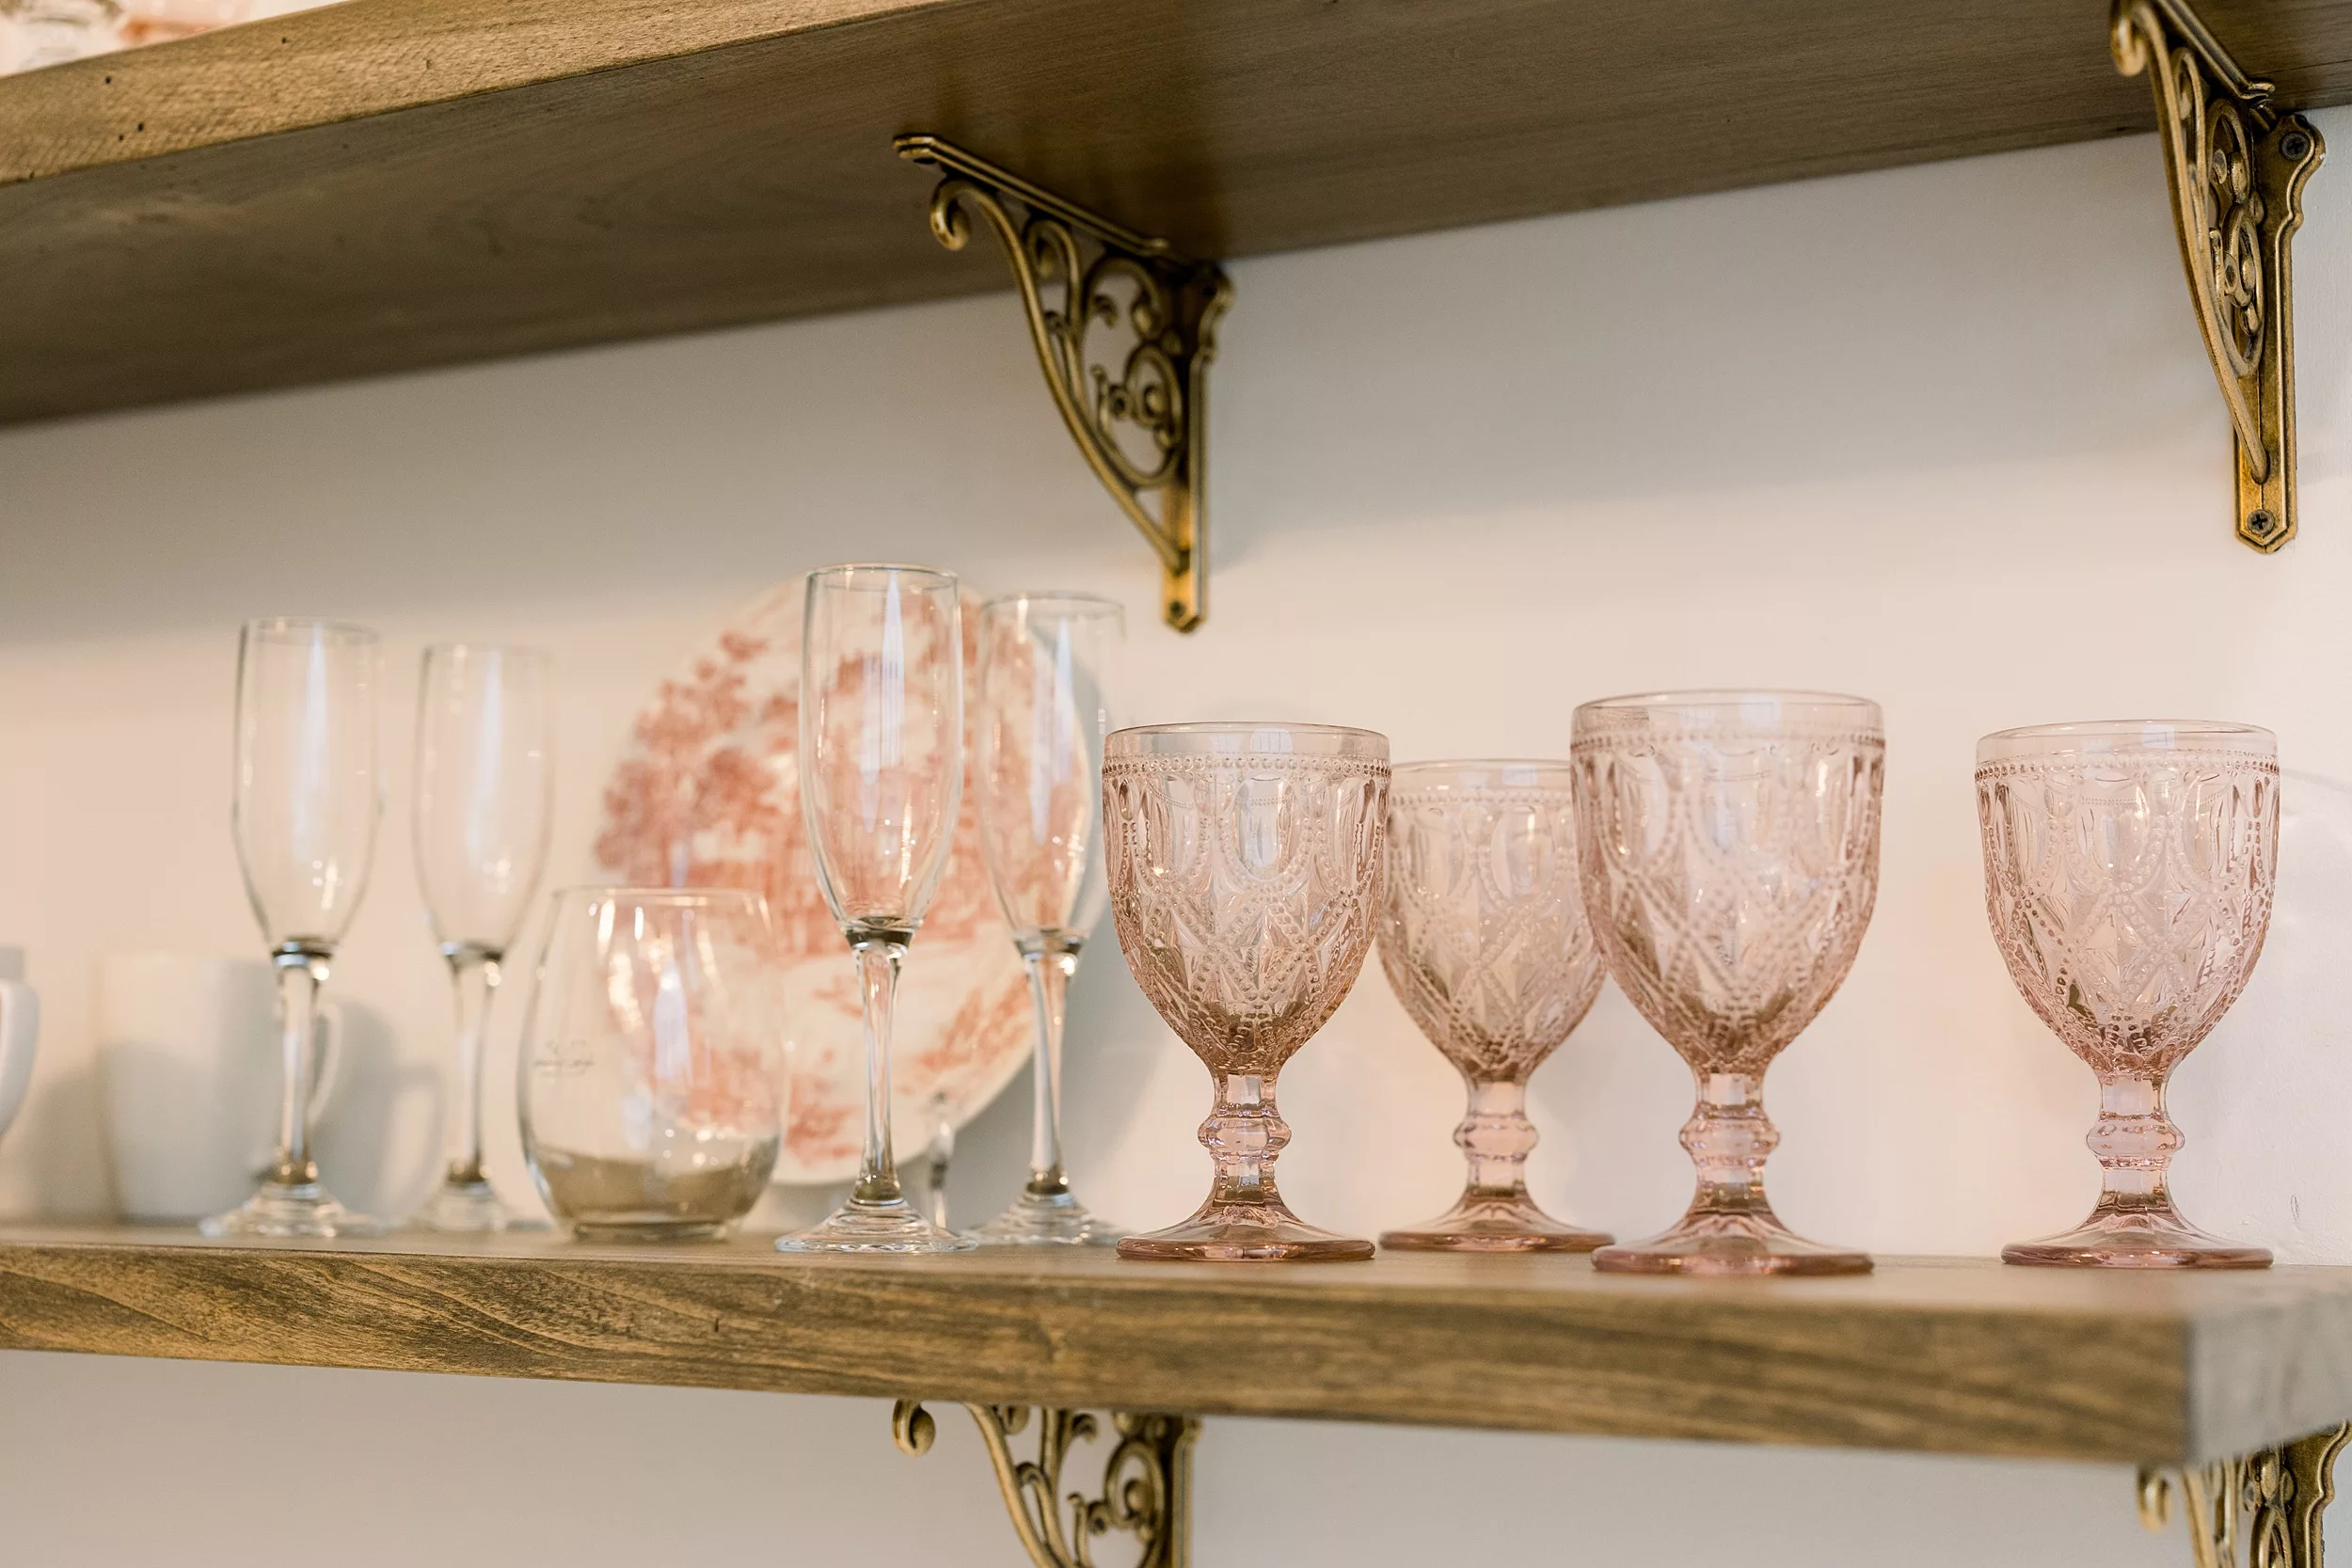 Details of flutes and glasses sitting on a wooden shelf